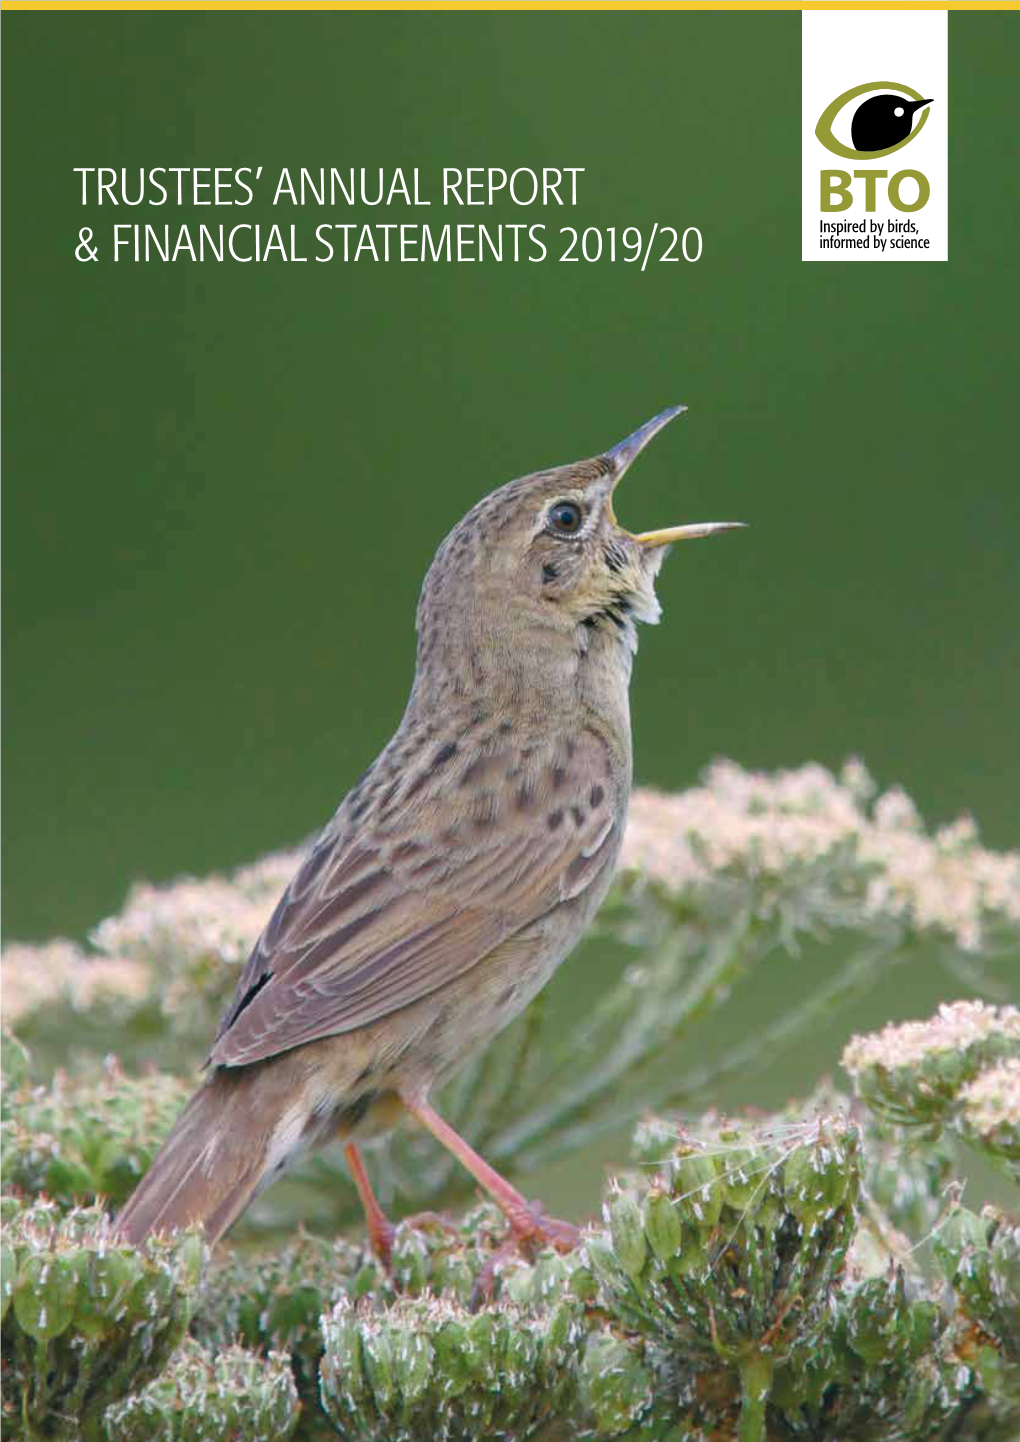 Trustees' Annual Report & Financial Statements 2019/20